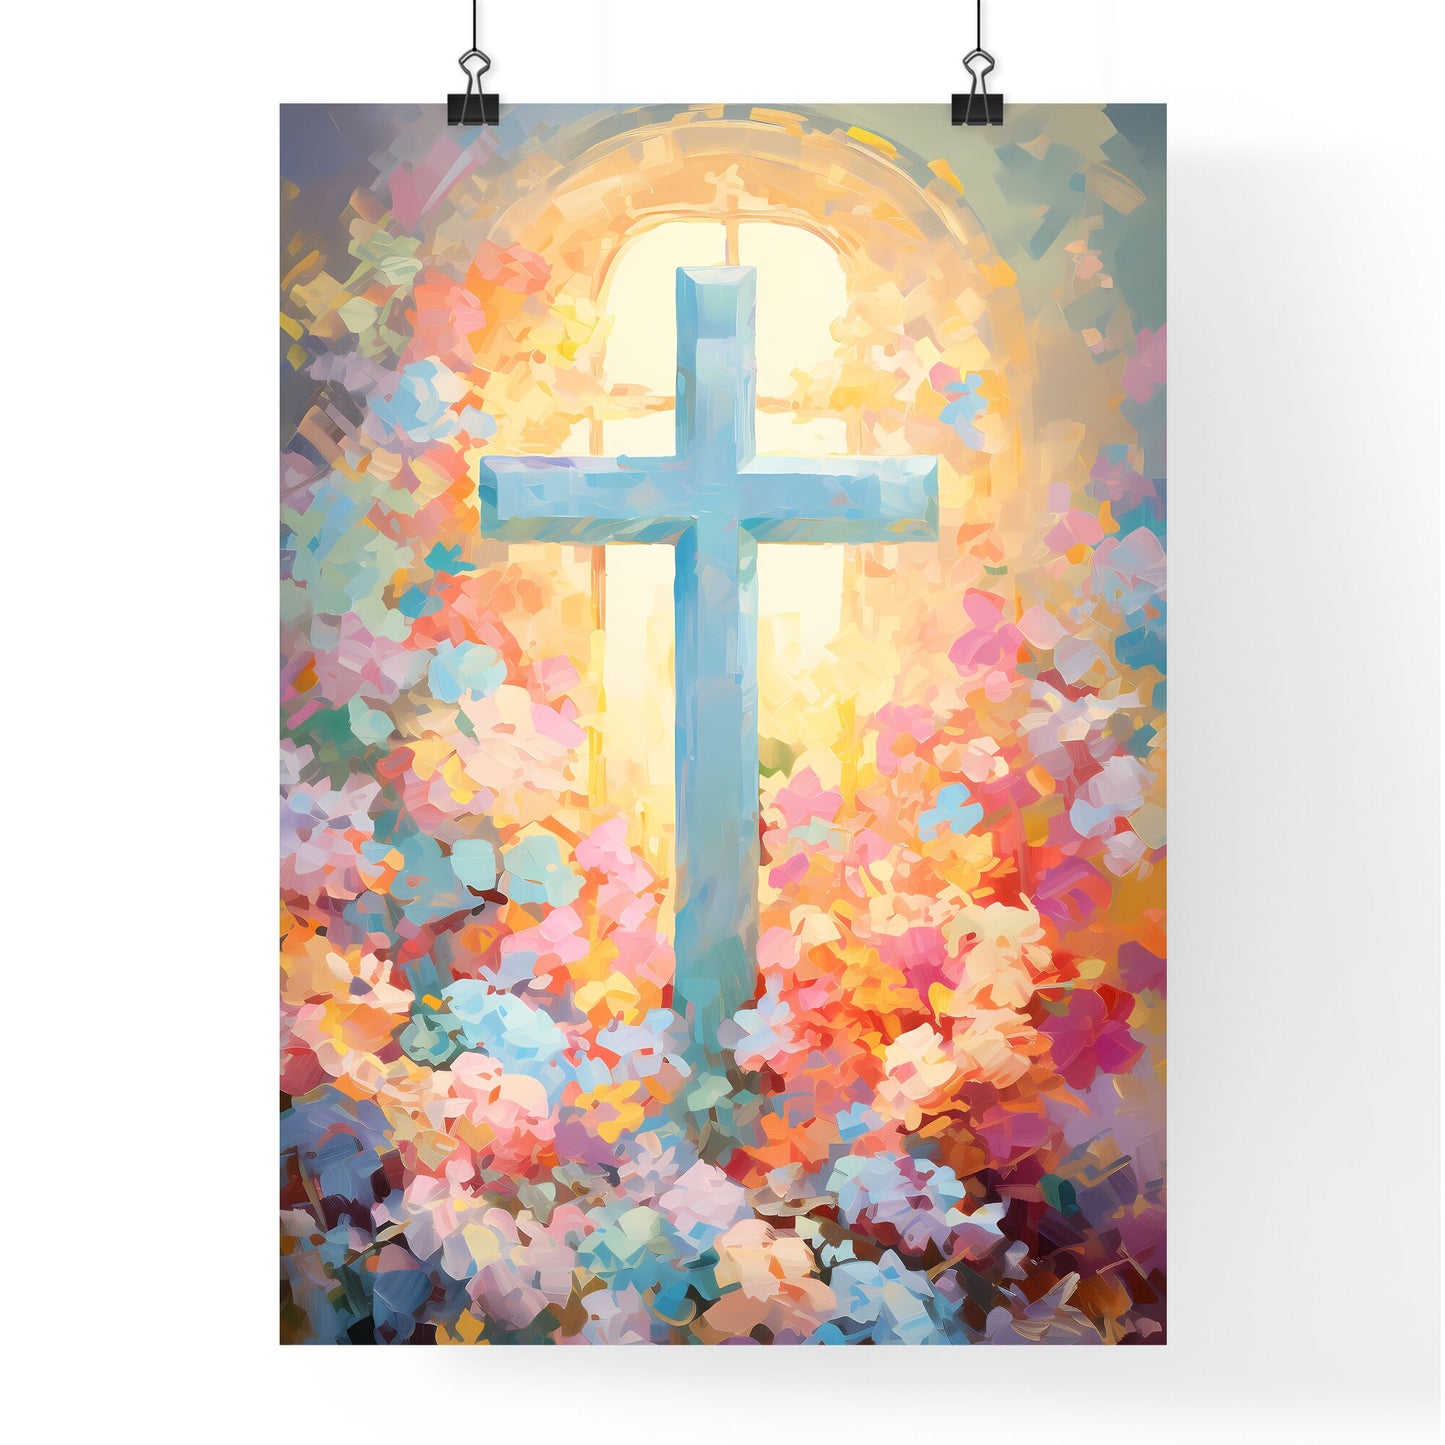 A Poster of a painting of a cross - A Cross In A Garden Default Title